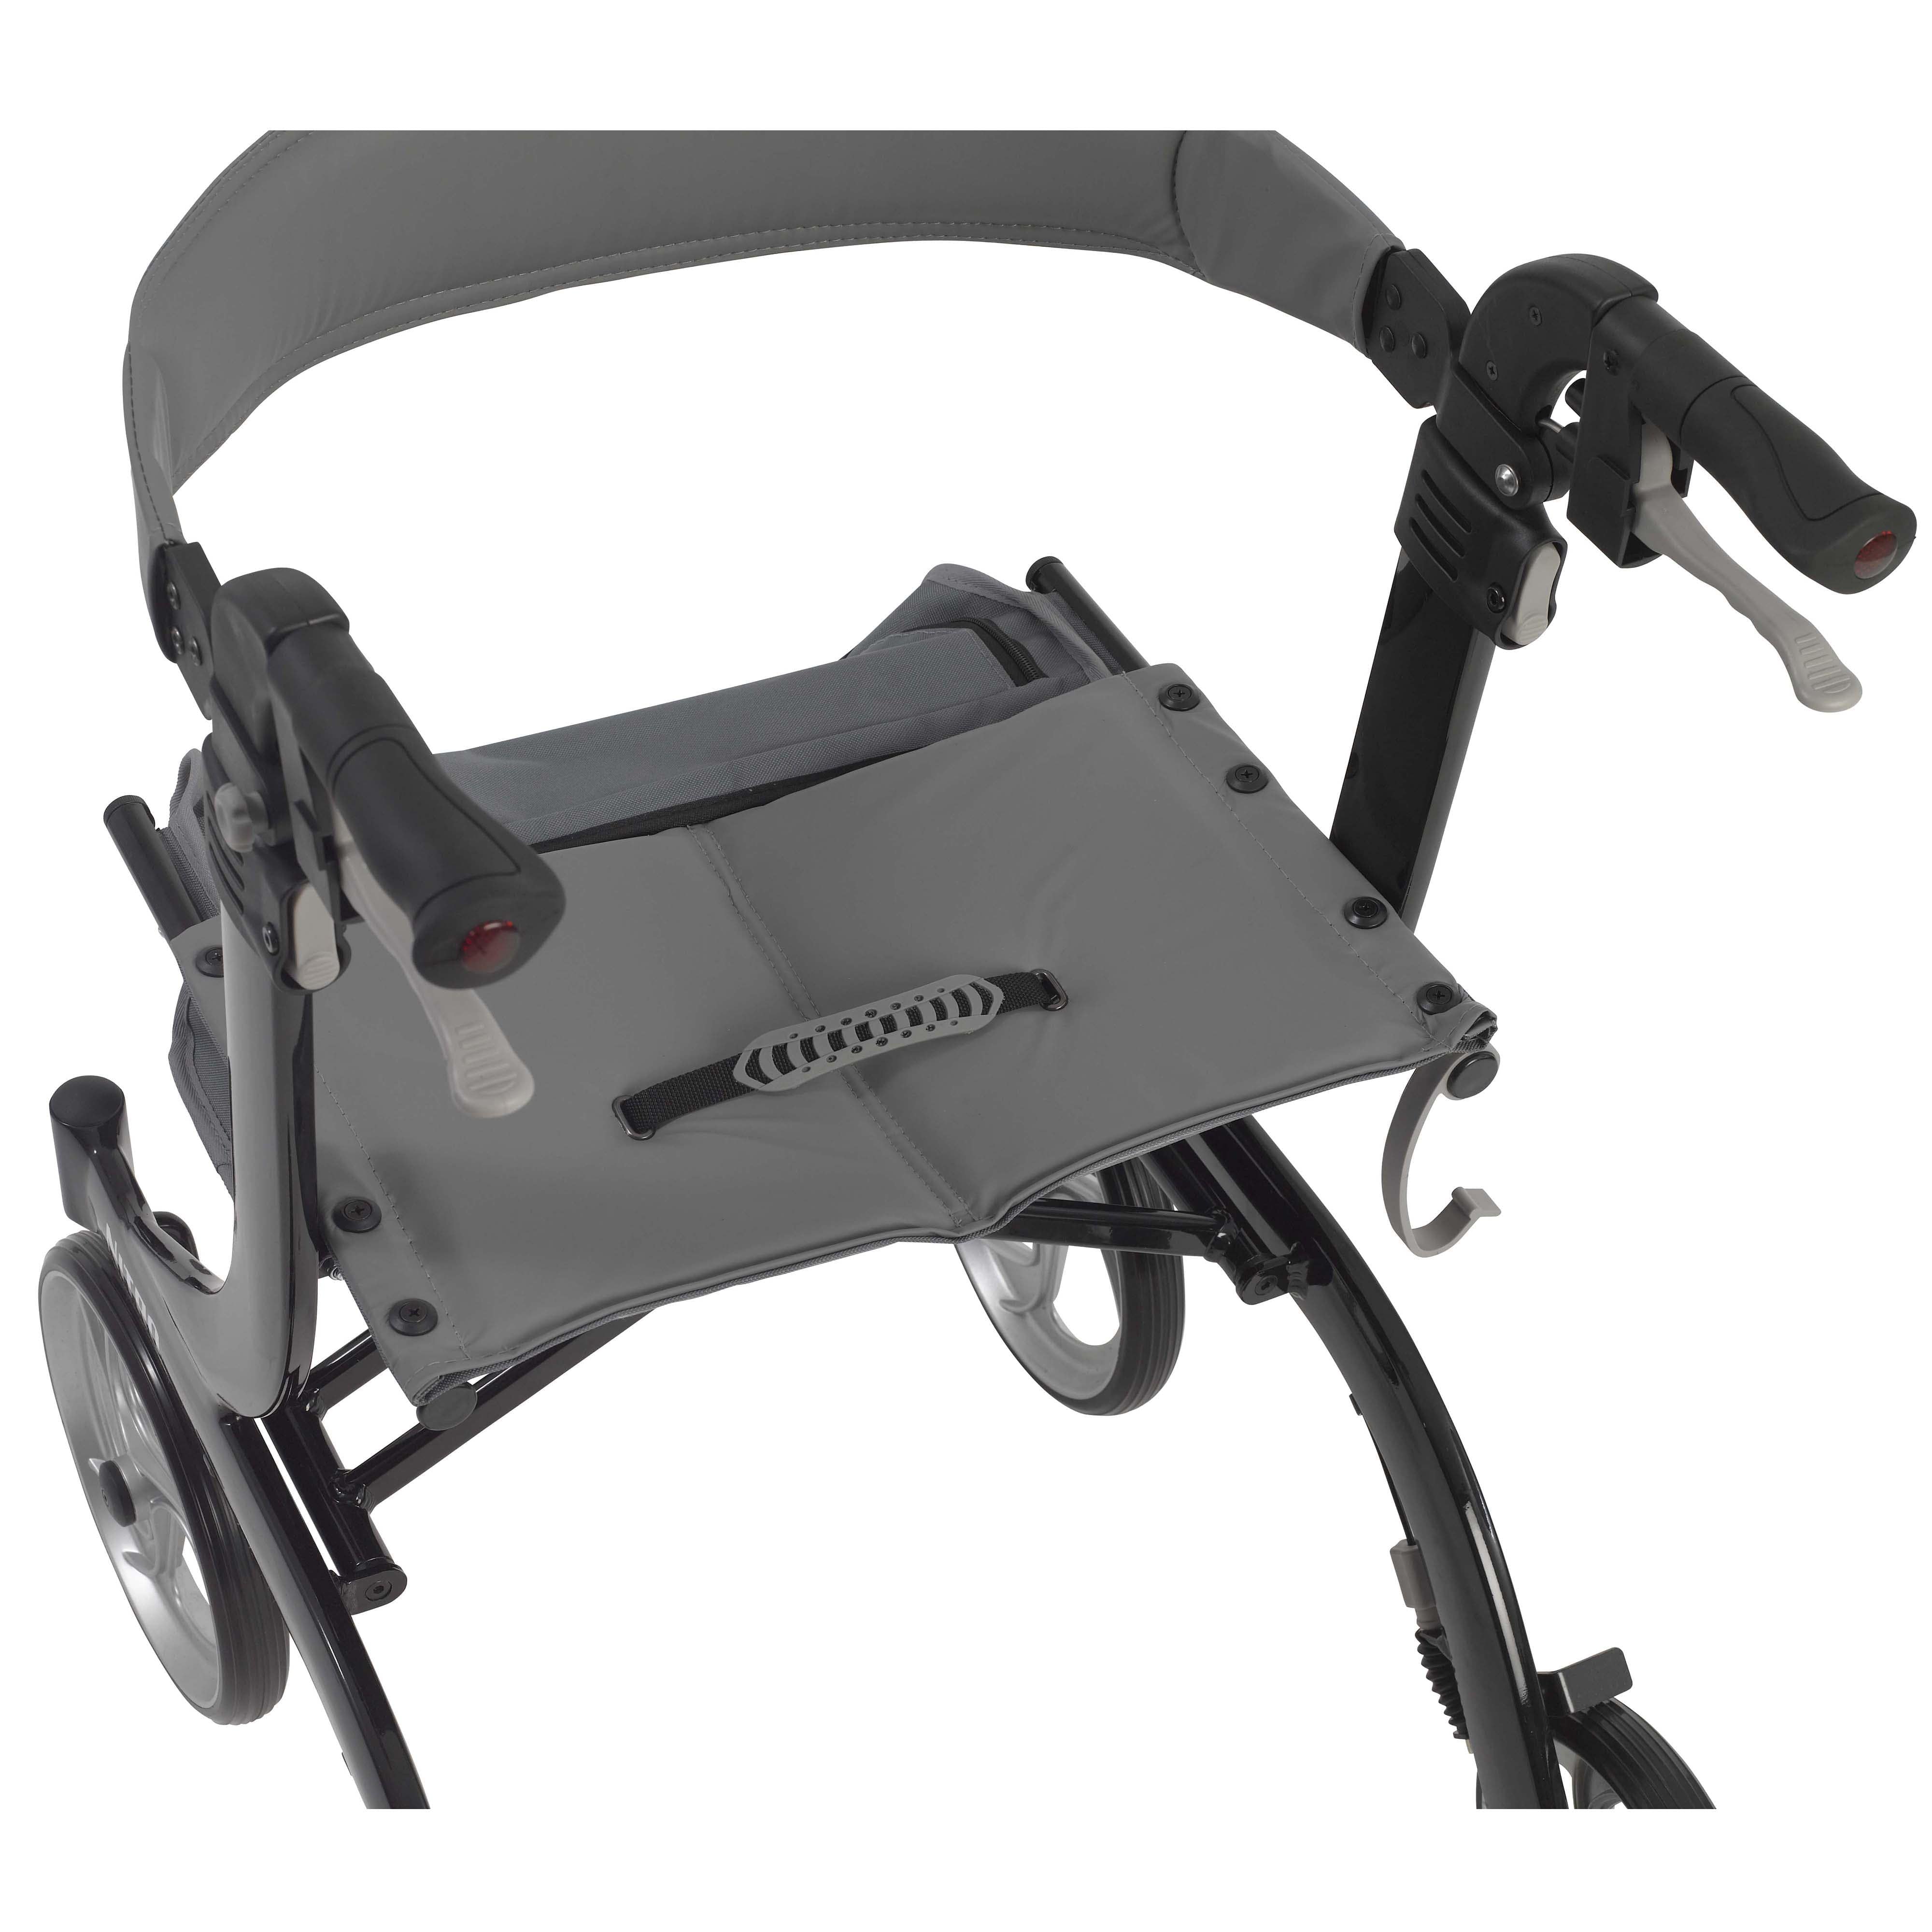 Drive Medical Drive Medical Nitro Euro Style Rollator Rolling Walker